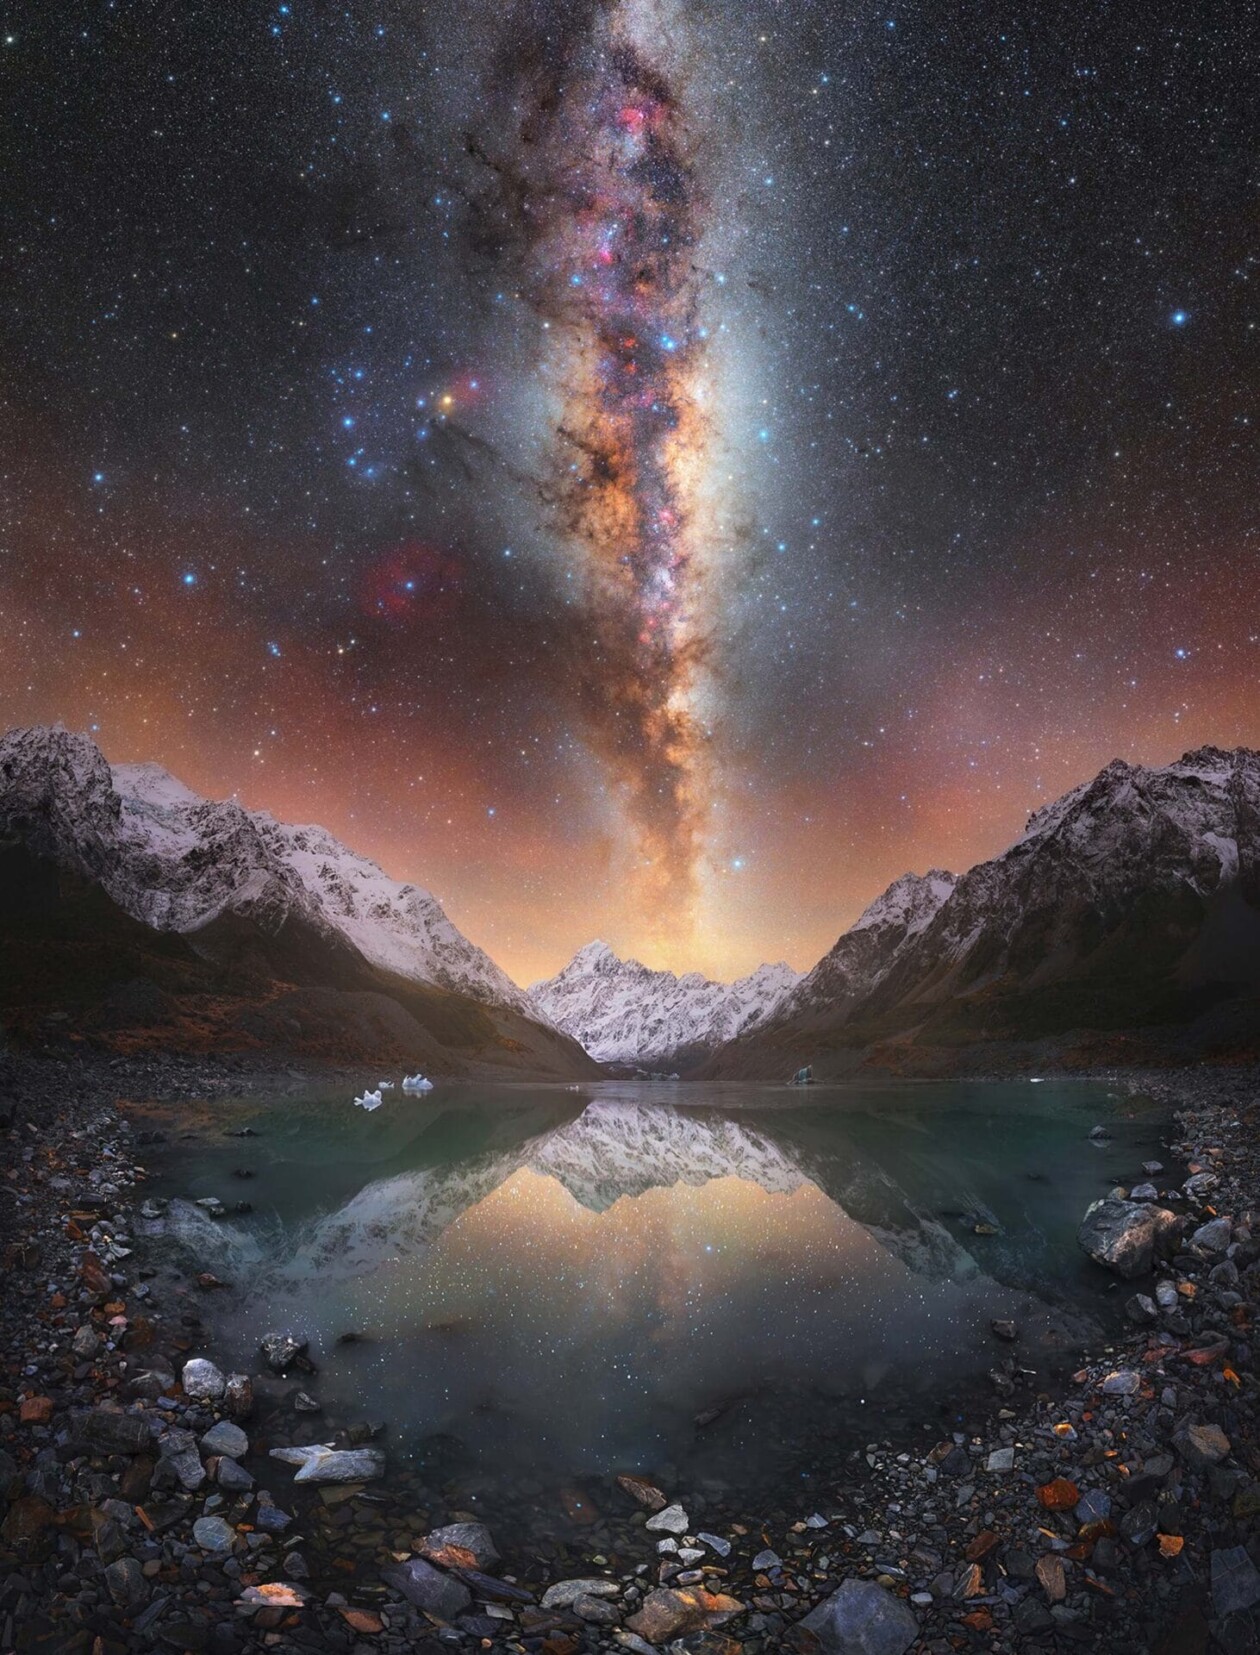 Capturing The Celestial Majesty In The Milky Way Photographer Of The Year Contest (6)